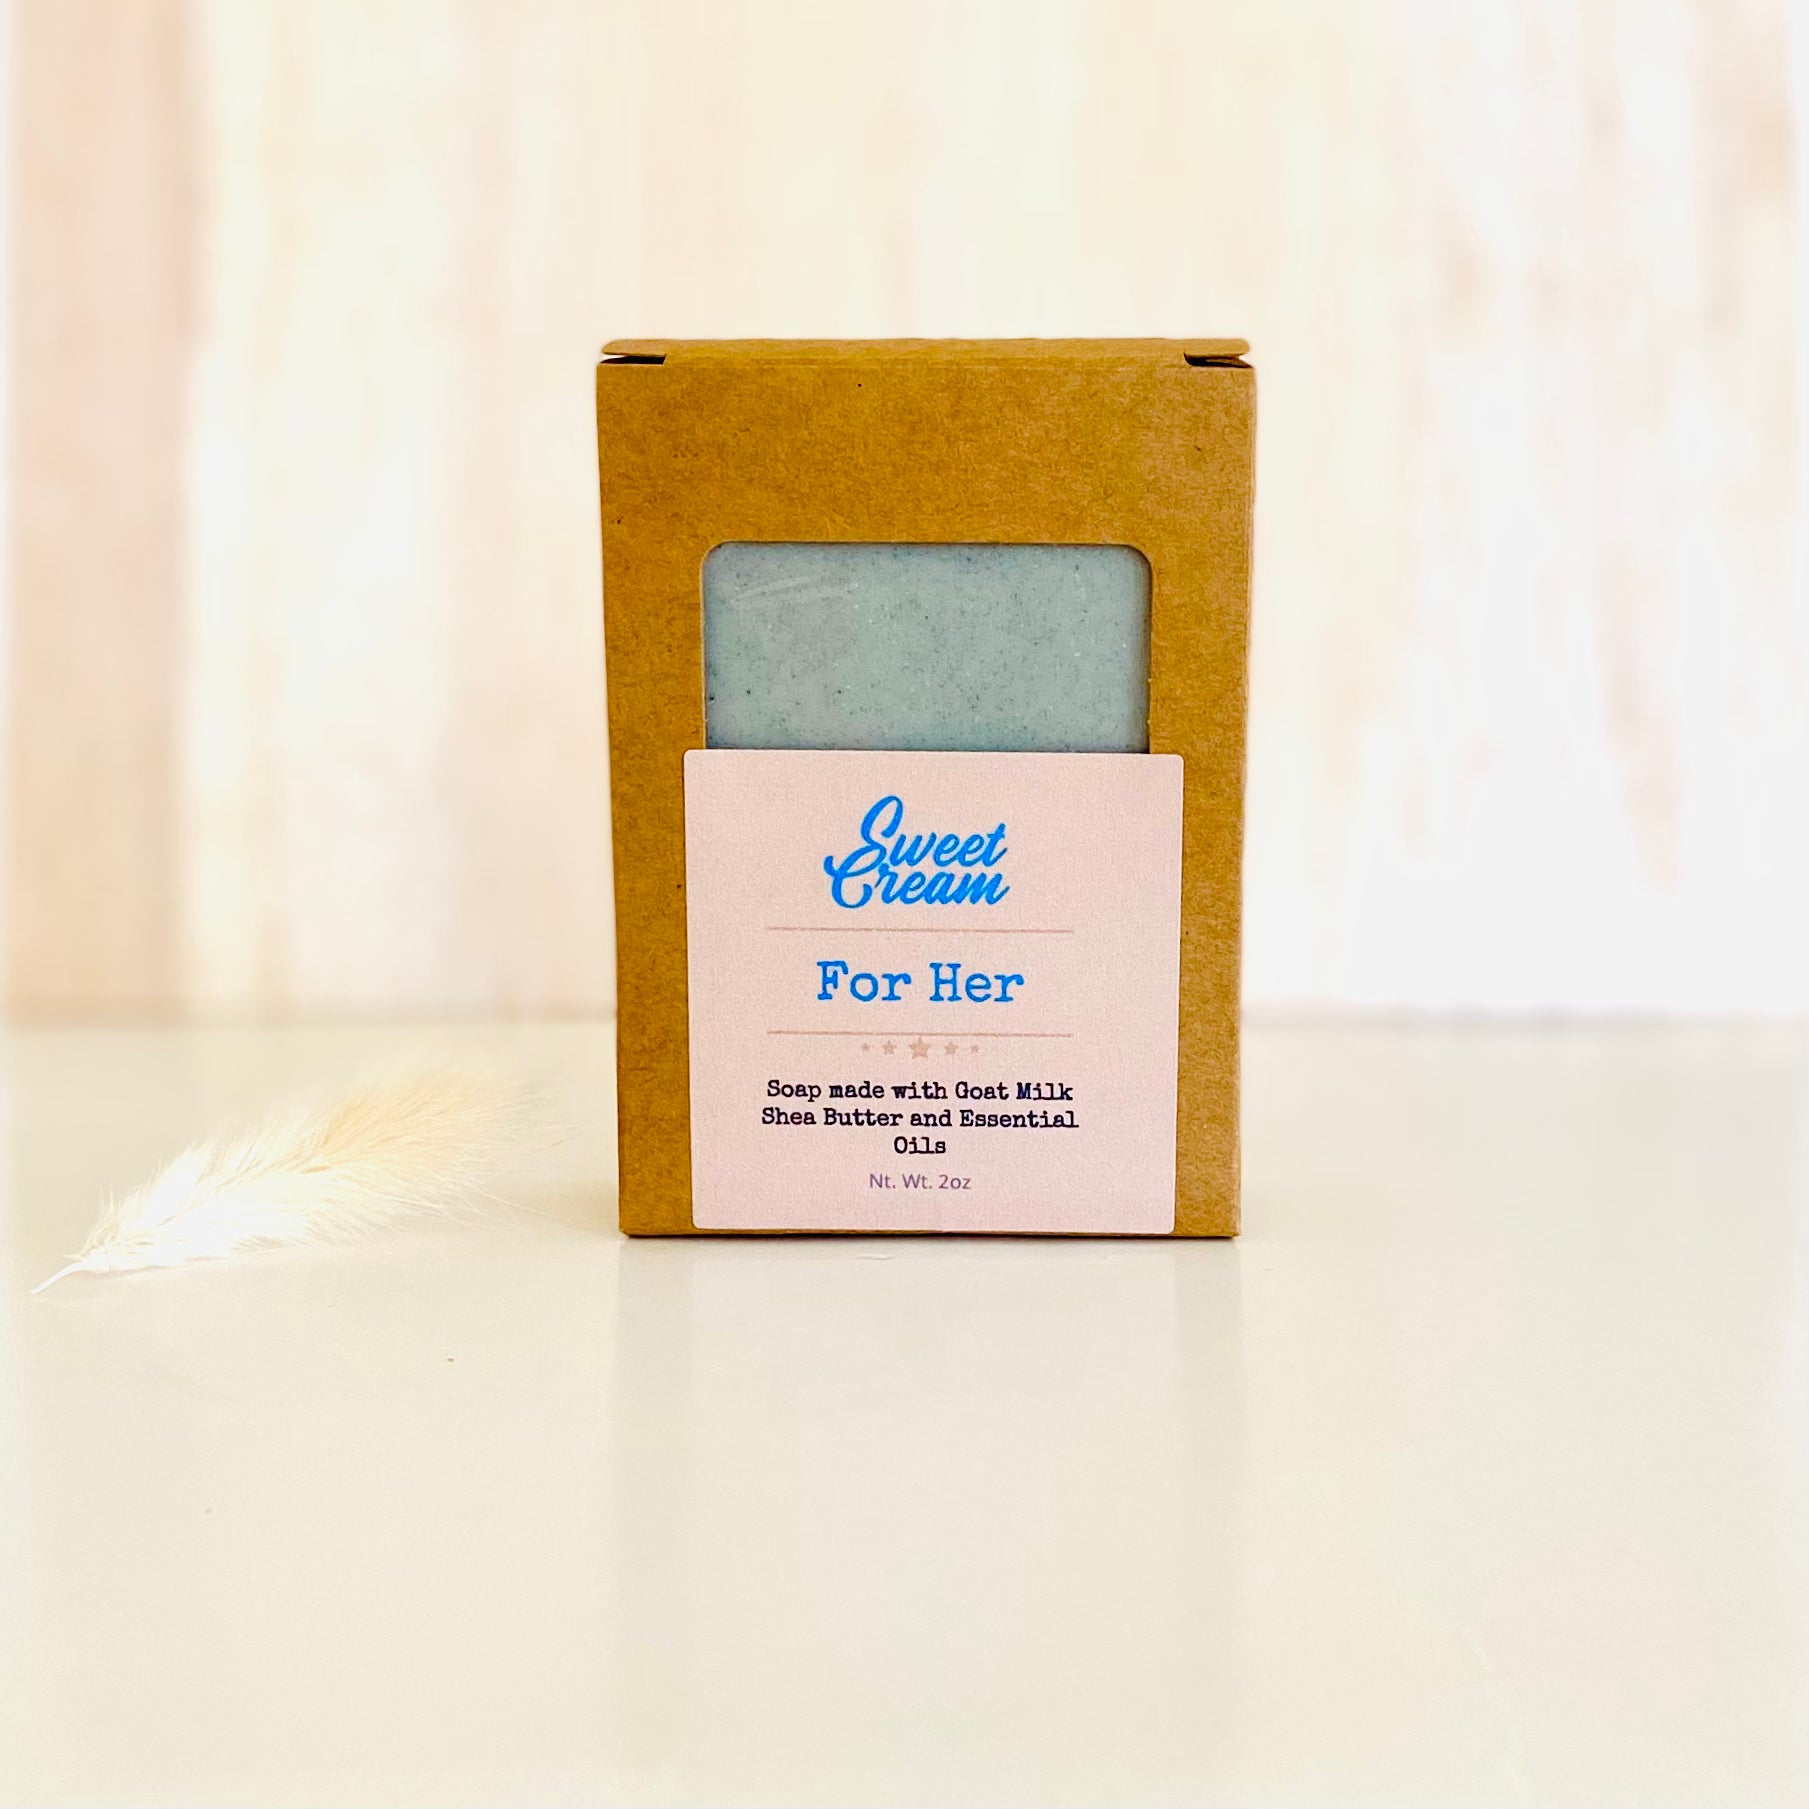 For Her, soap is packed with natural ingredients to cleanse your skin without stripping away your body's natural essence. Made with Abercrombie and Fitch elegant organic fragrance oil and a hint of peach notes. 